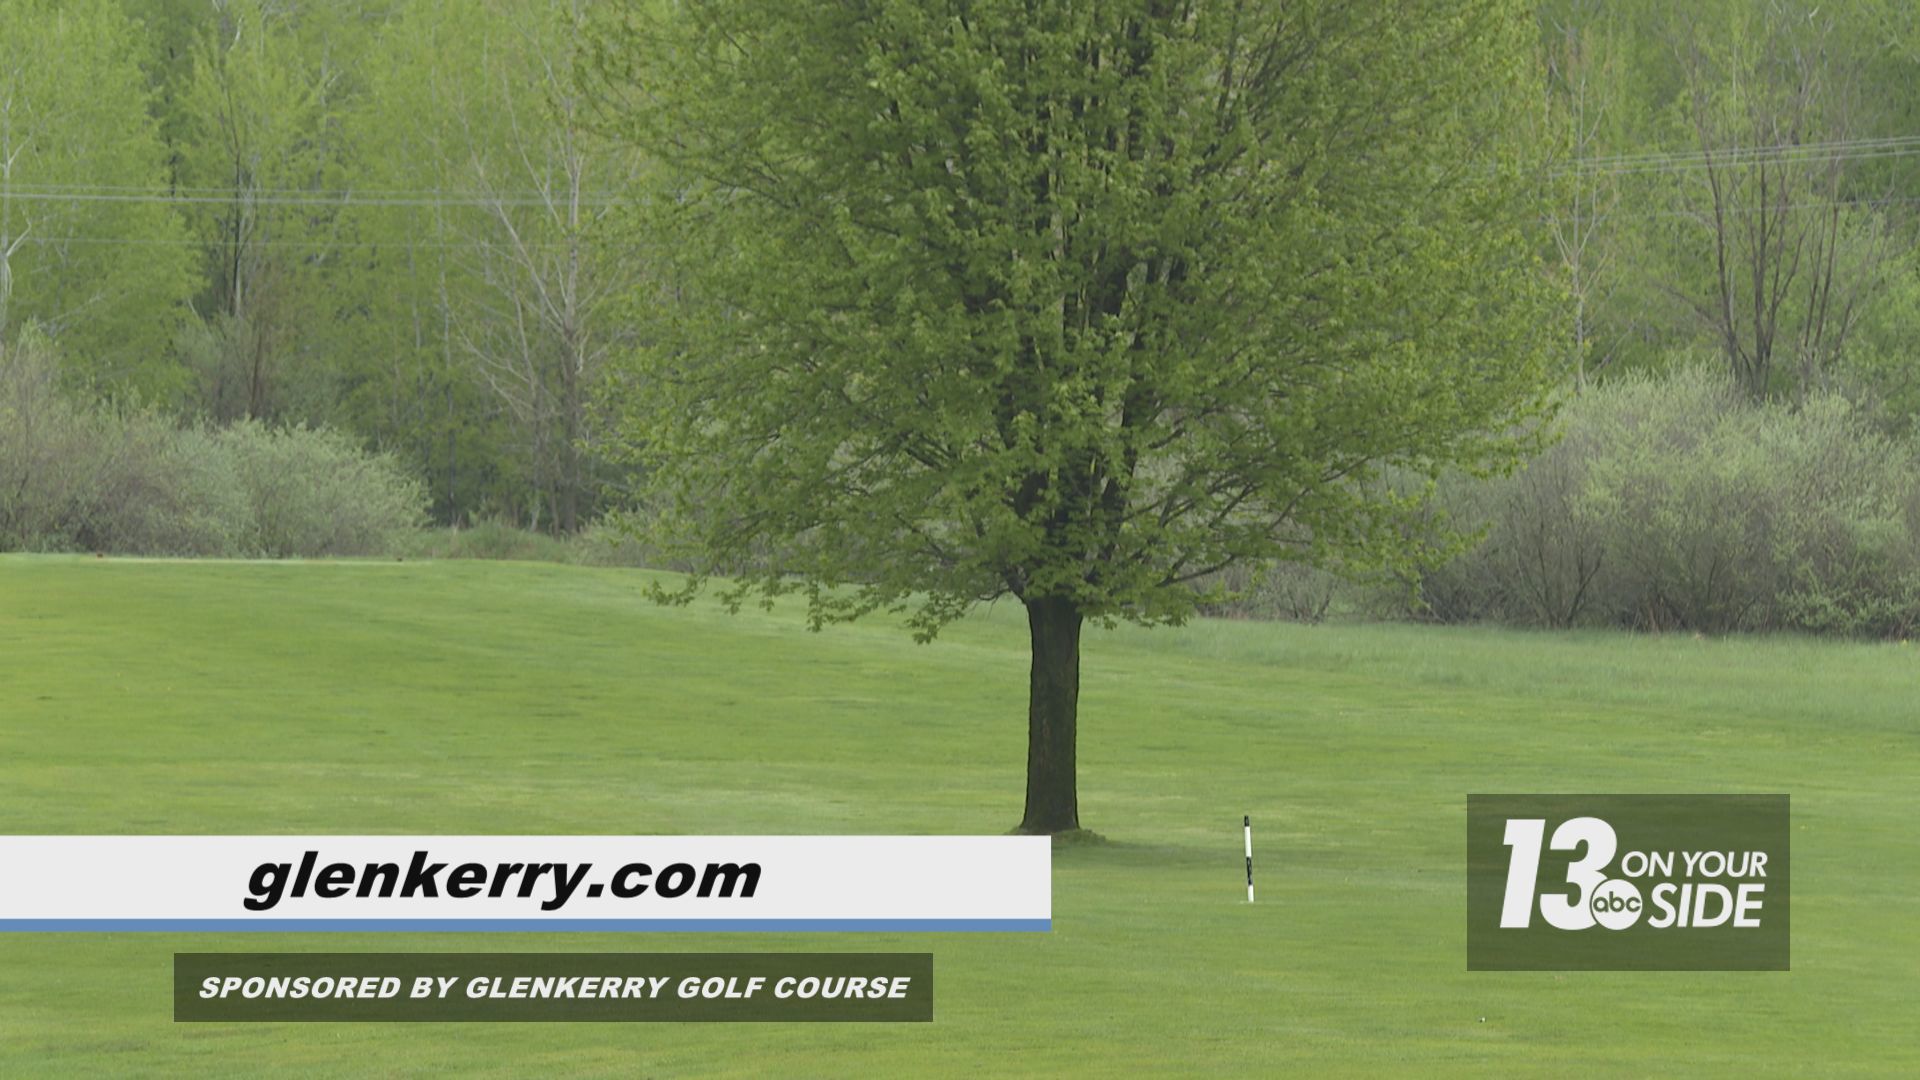 Glenkerry Golf Course in Greenville promises "affordable excellence” and that applies to everything from course conditions to customer service, all at a great price.